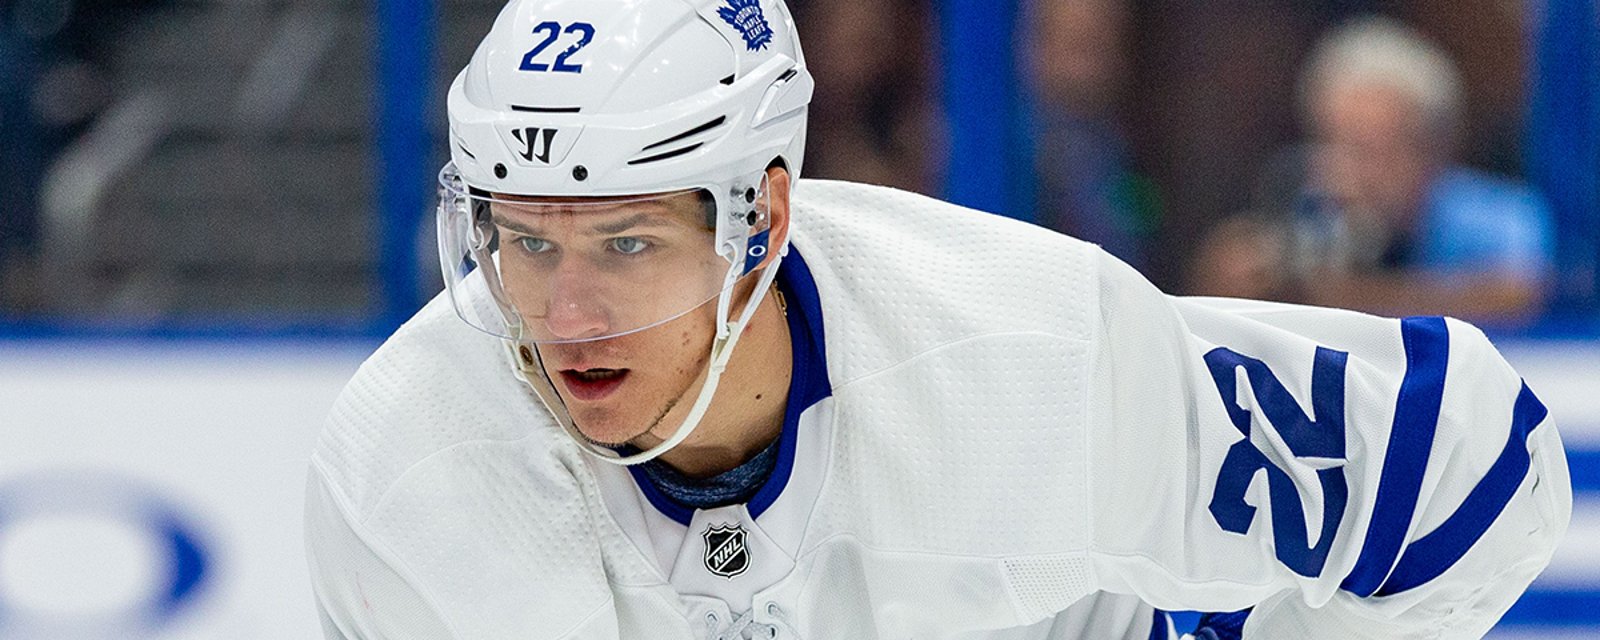 Report: Leafs’ Zaitsev has requested a trade